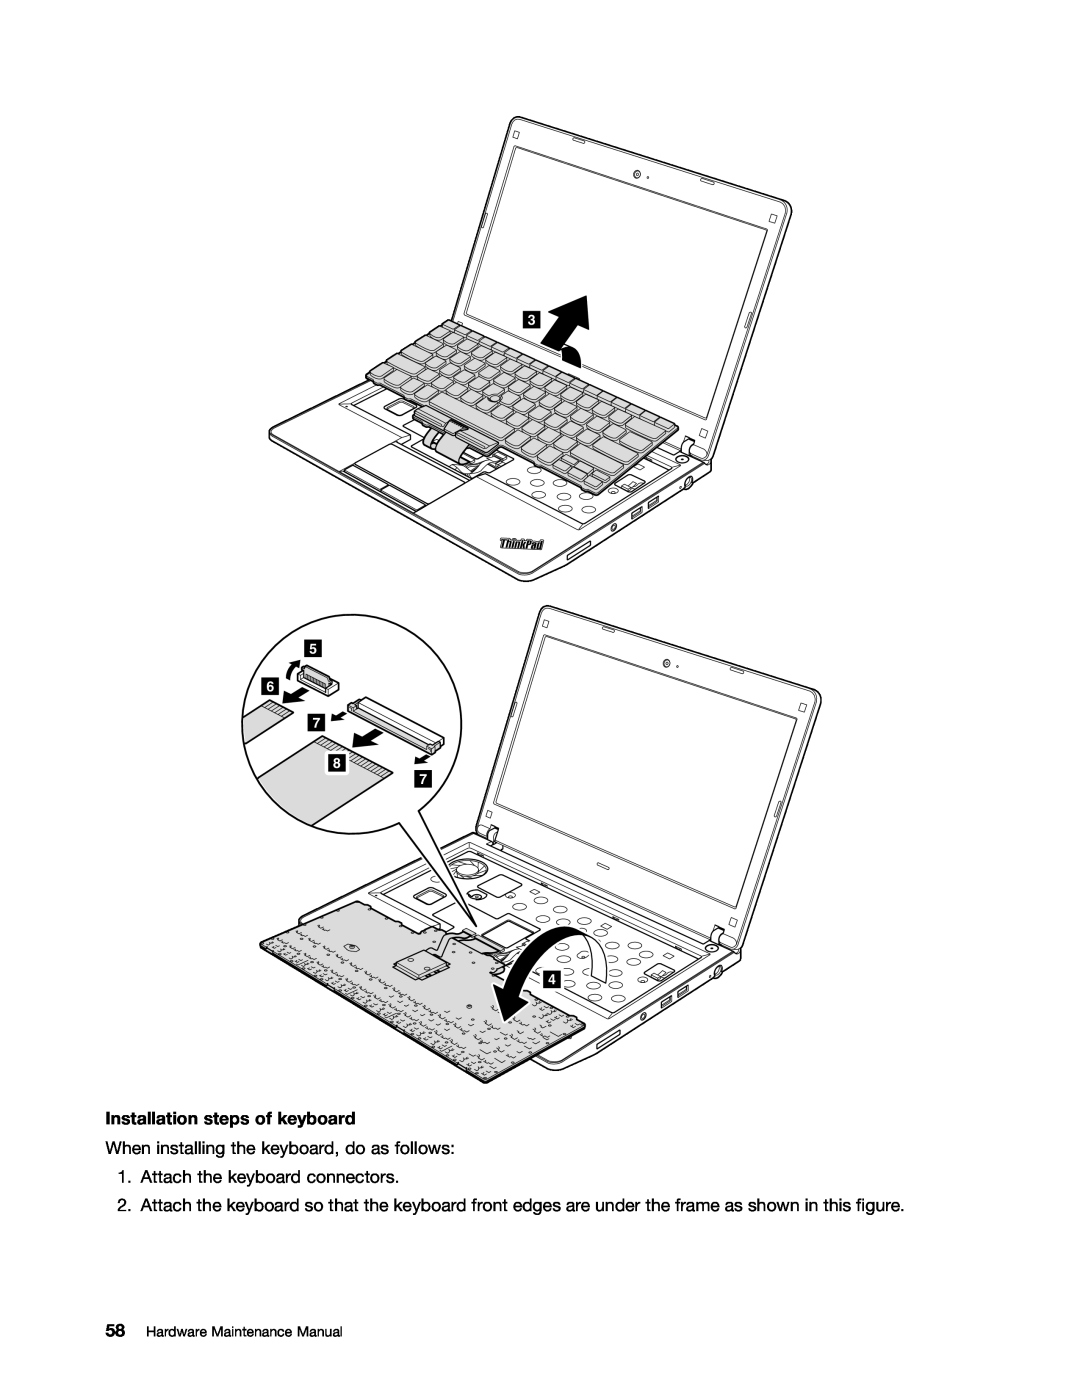 Lenovo E30 Installation steps of keyboard, When installing the keyboard, do as follows, Attach the keyboard connectors 